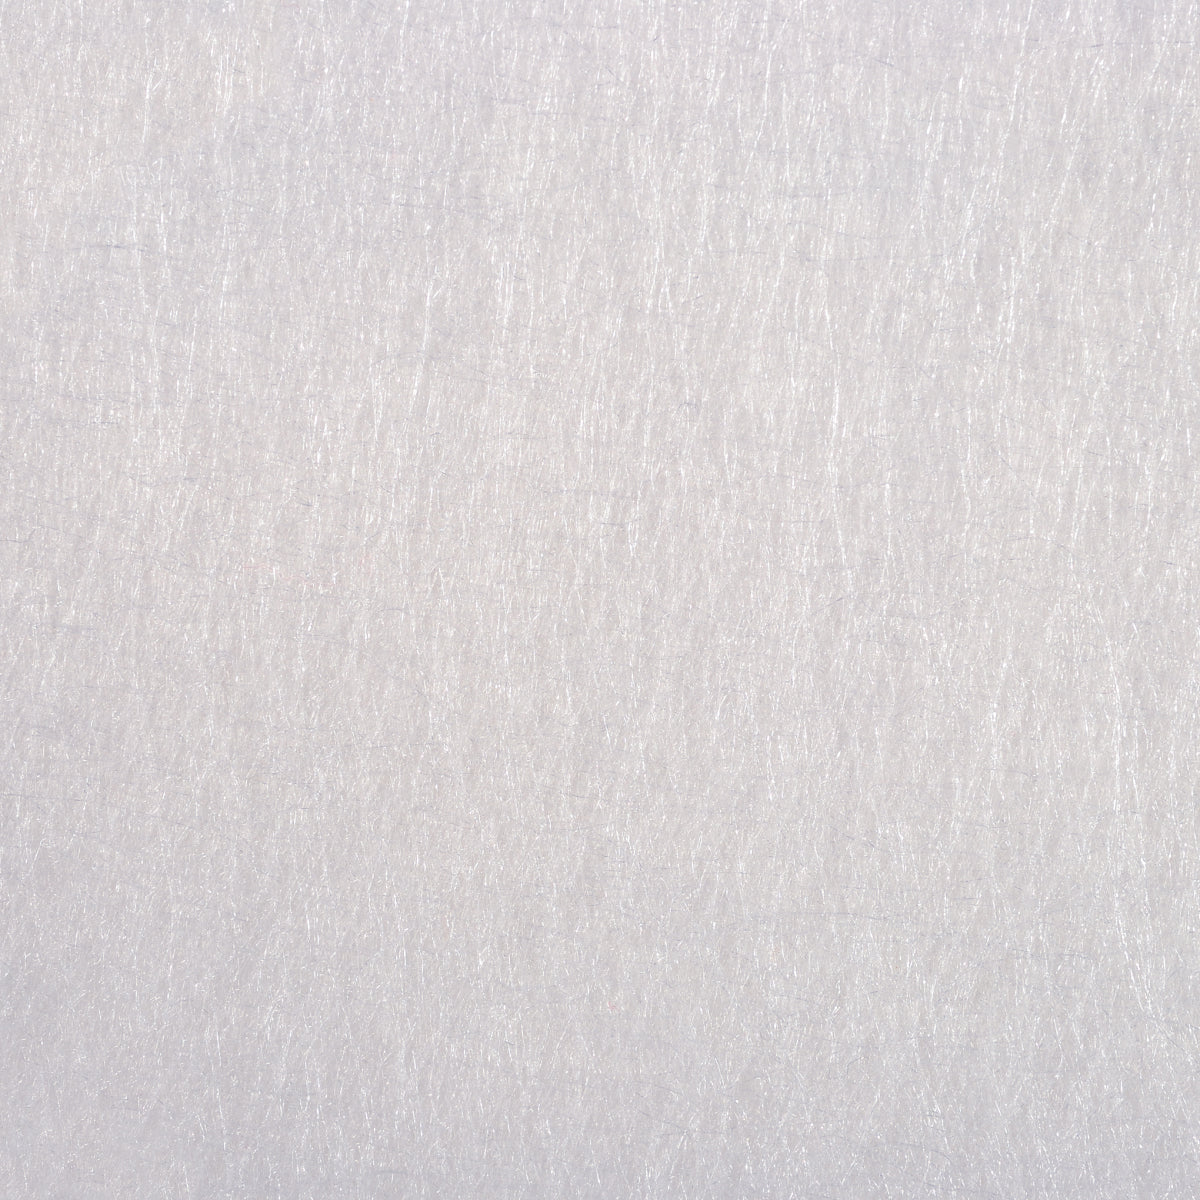 Examples of fibers used in nonwoven fabrics: polyester, rayon (viscose), nylon, acrylic and bamboo fiber.